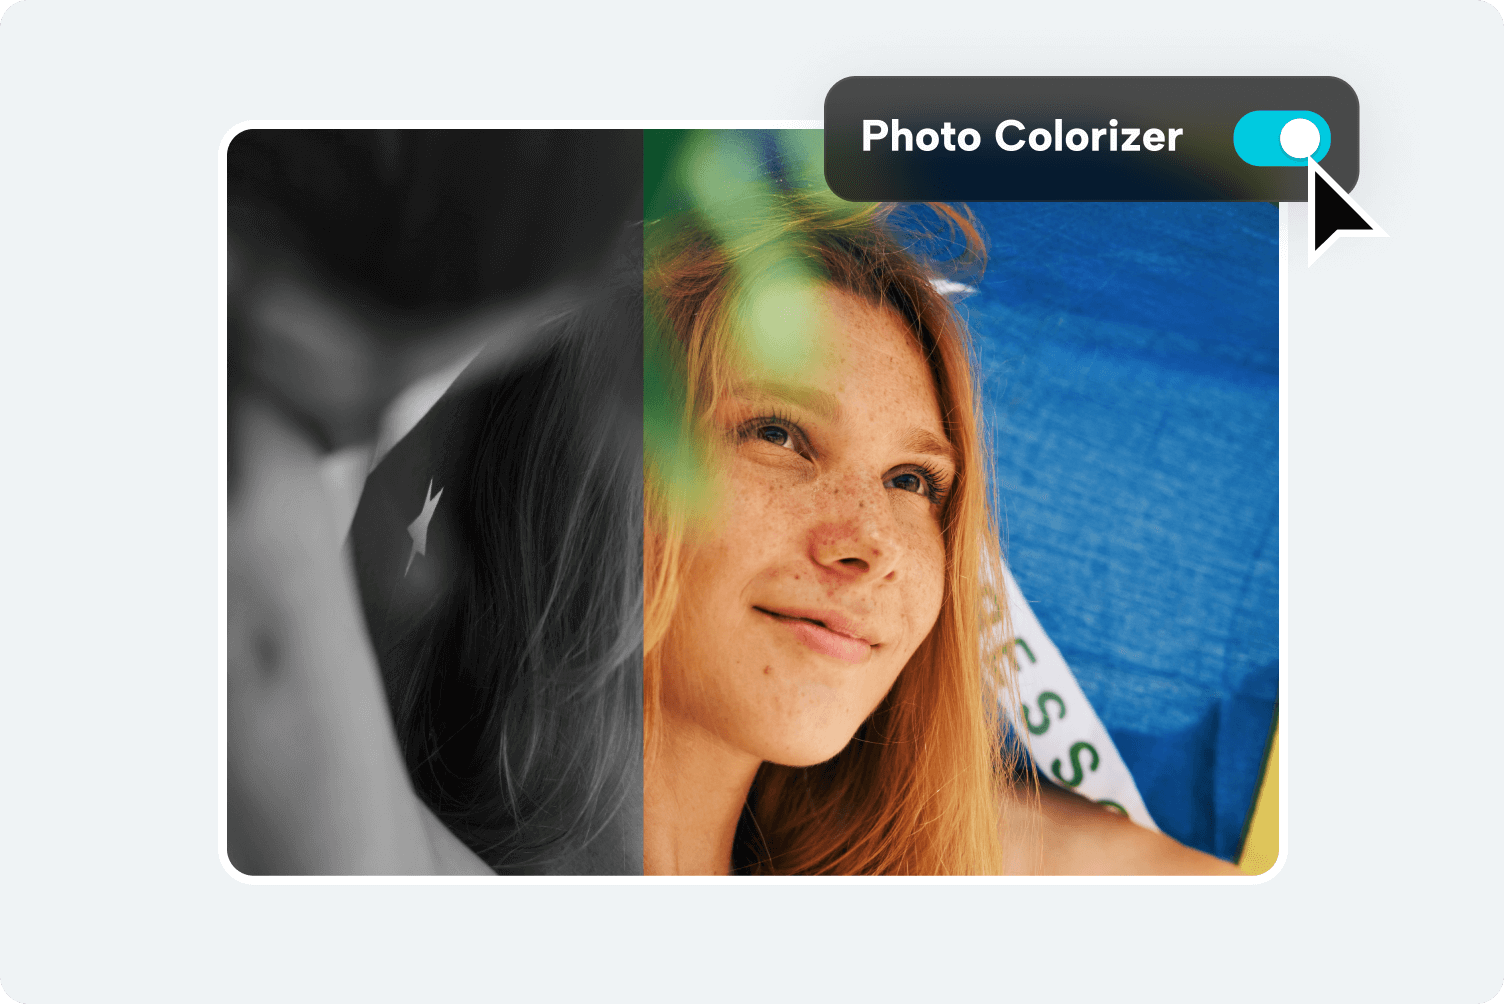 Preview the generated image by photo colorizer